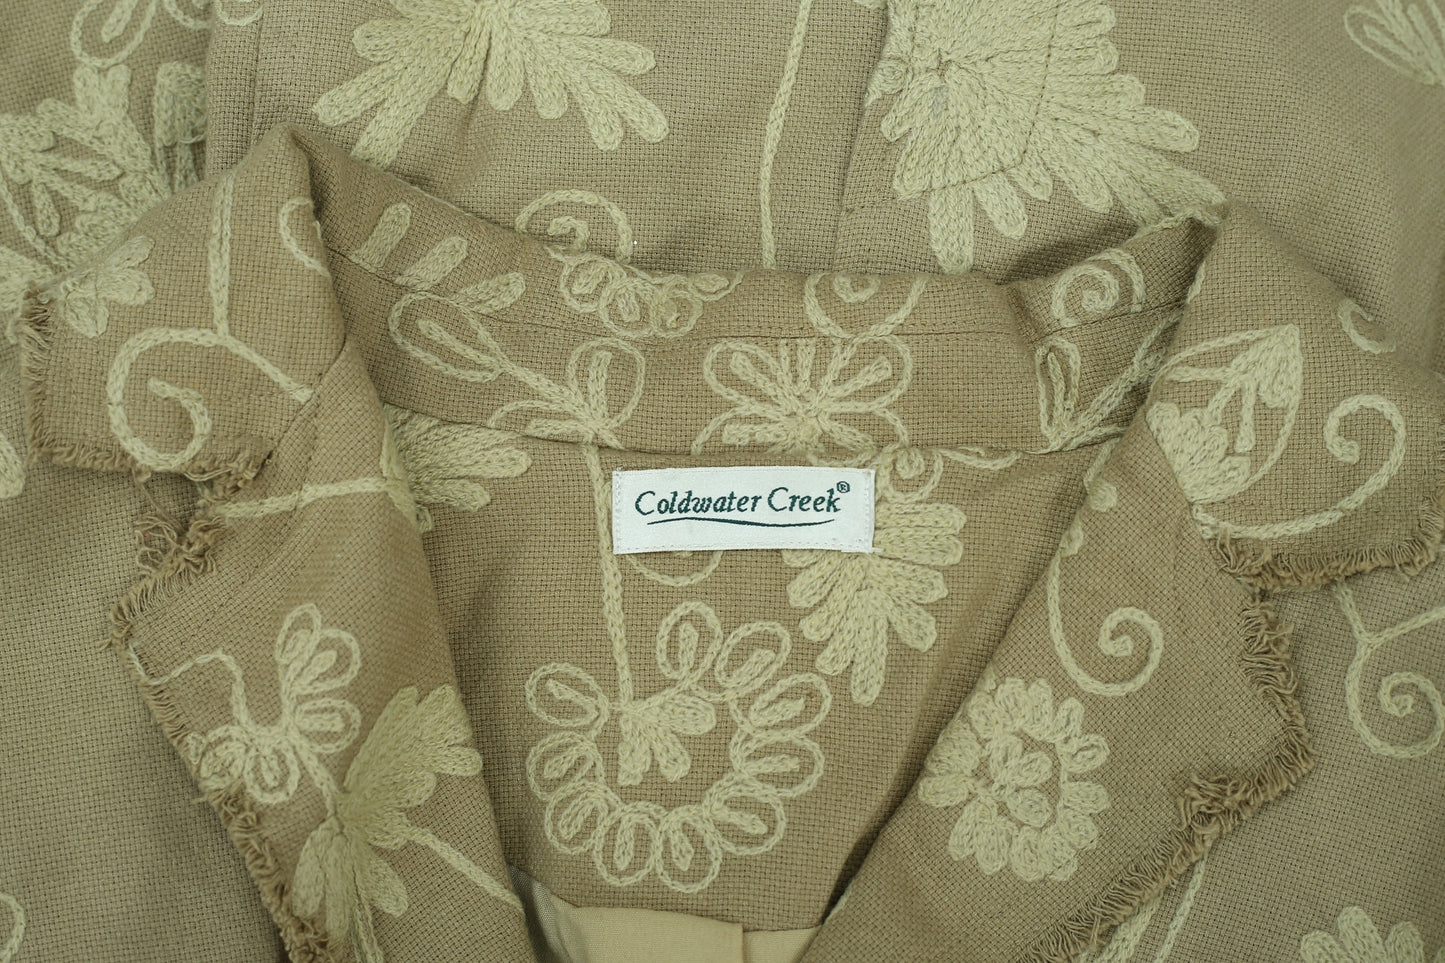 Coldwater Creek Floral Embroidered Tan Jacket Top M